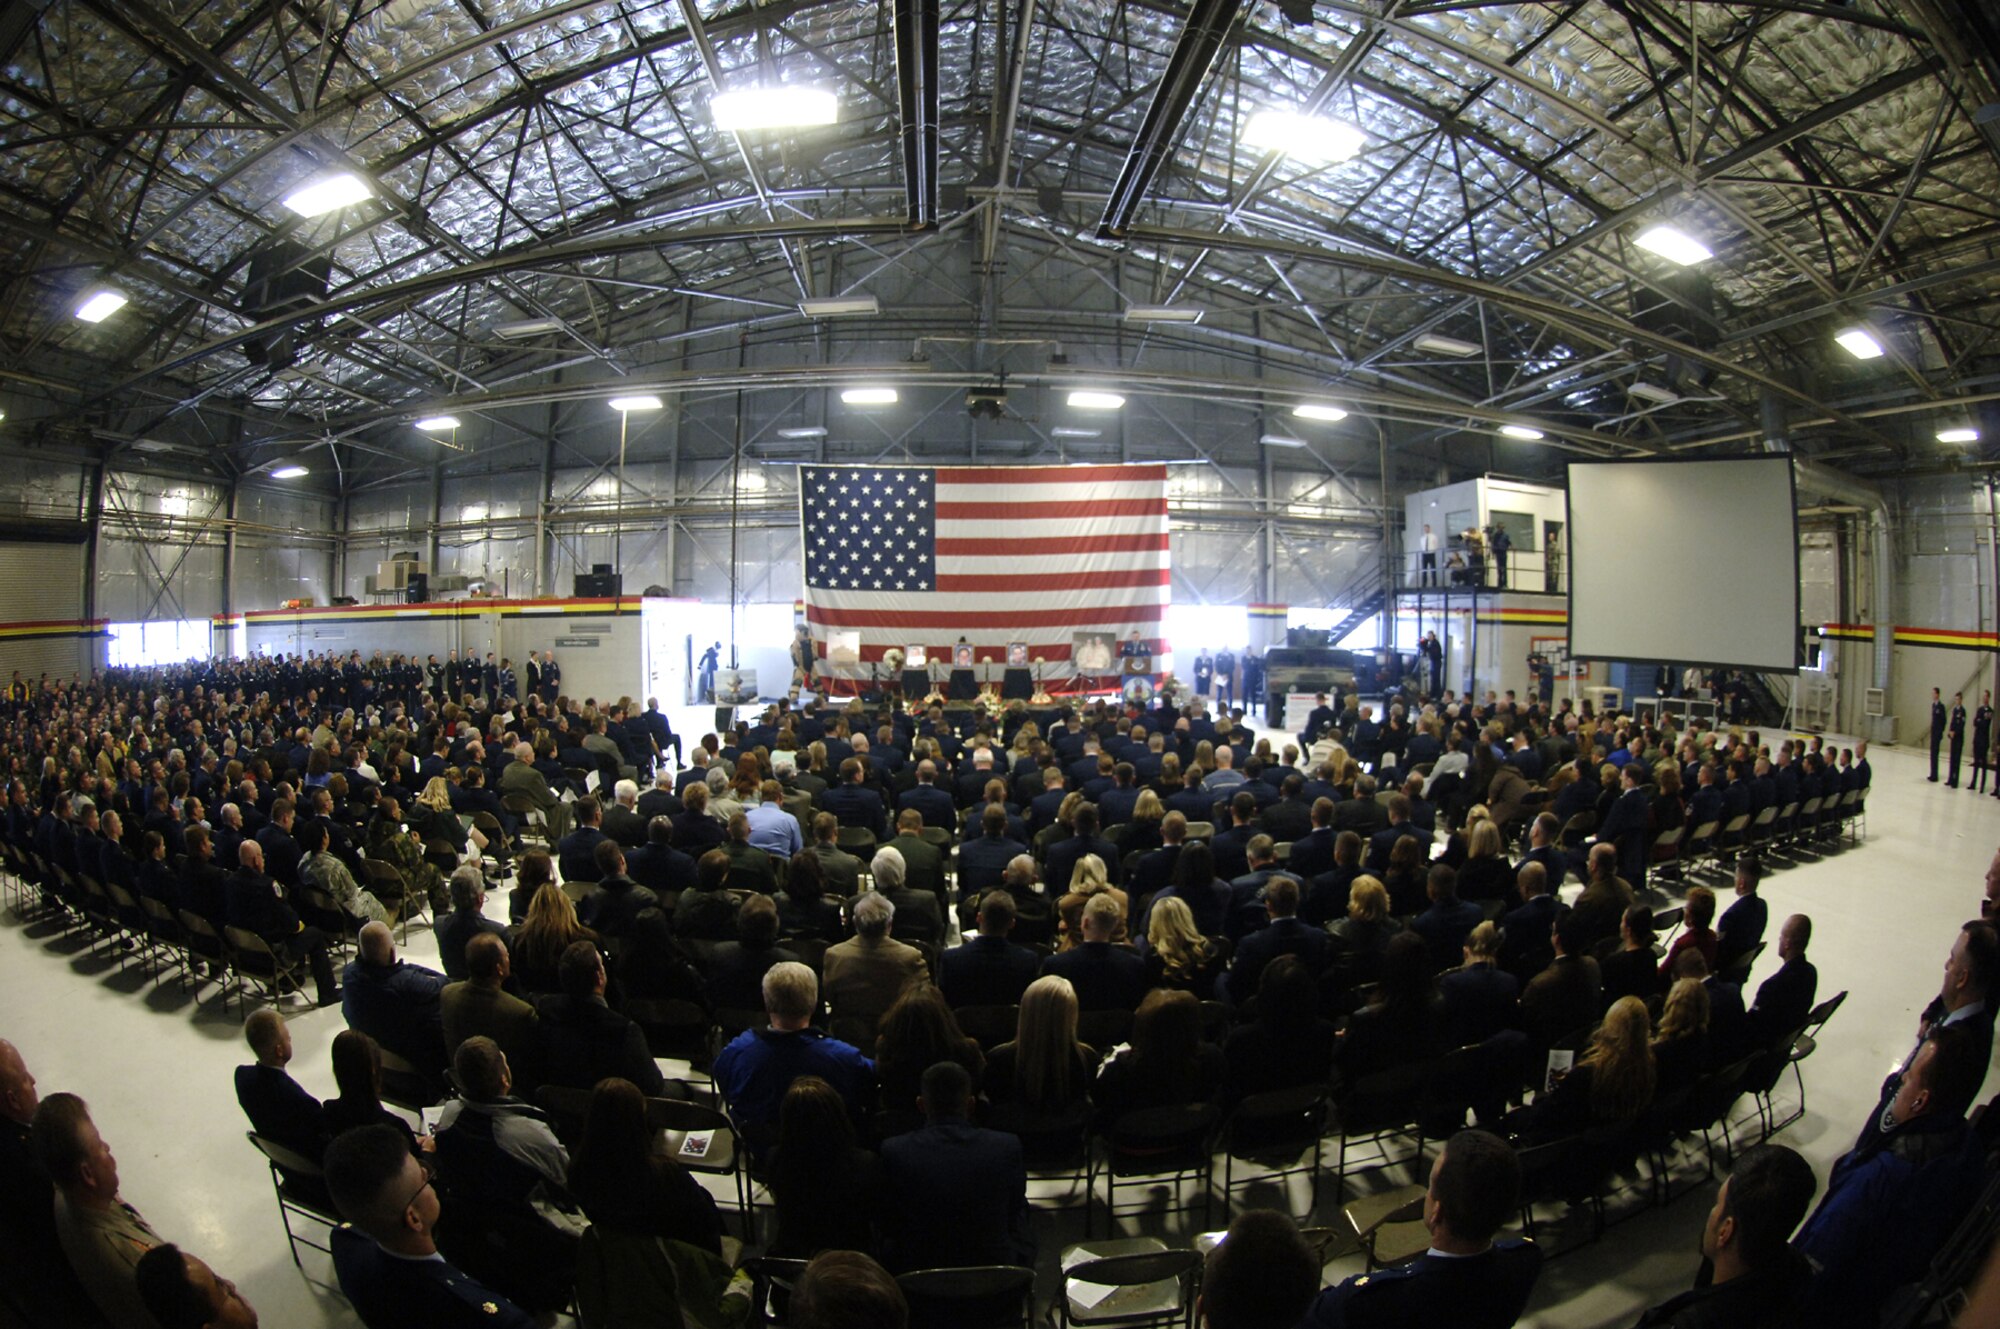 Attendees filled a hangar during a Memorial Service held Friday at Hill AFB for three killed in Iraq.  The three Airmen were members of the 775th Civil Engineer Squadron’s Explosive Ordnance Disposal Flight. 